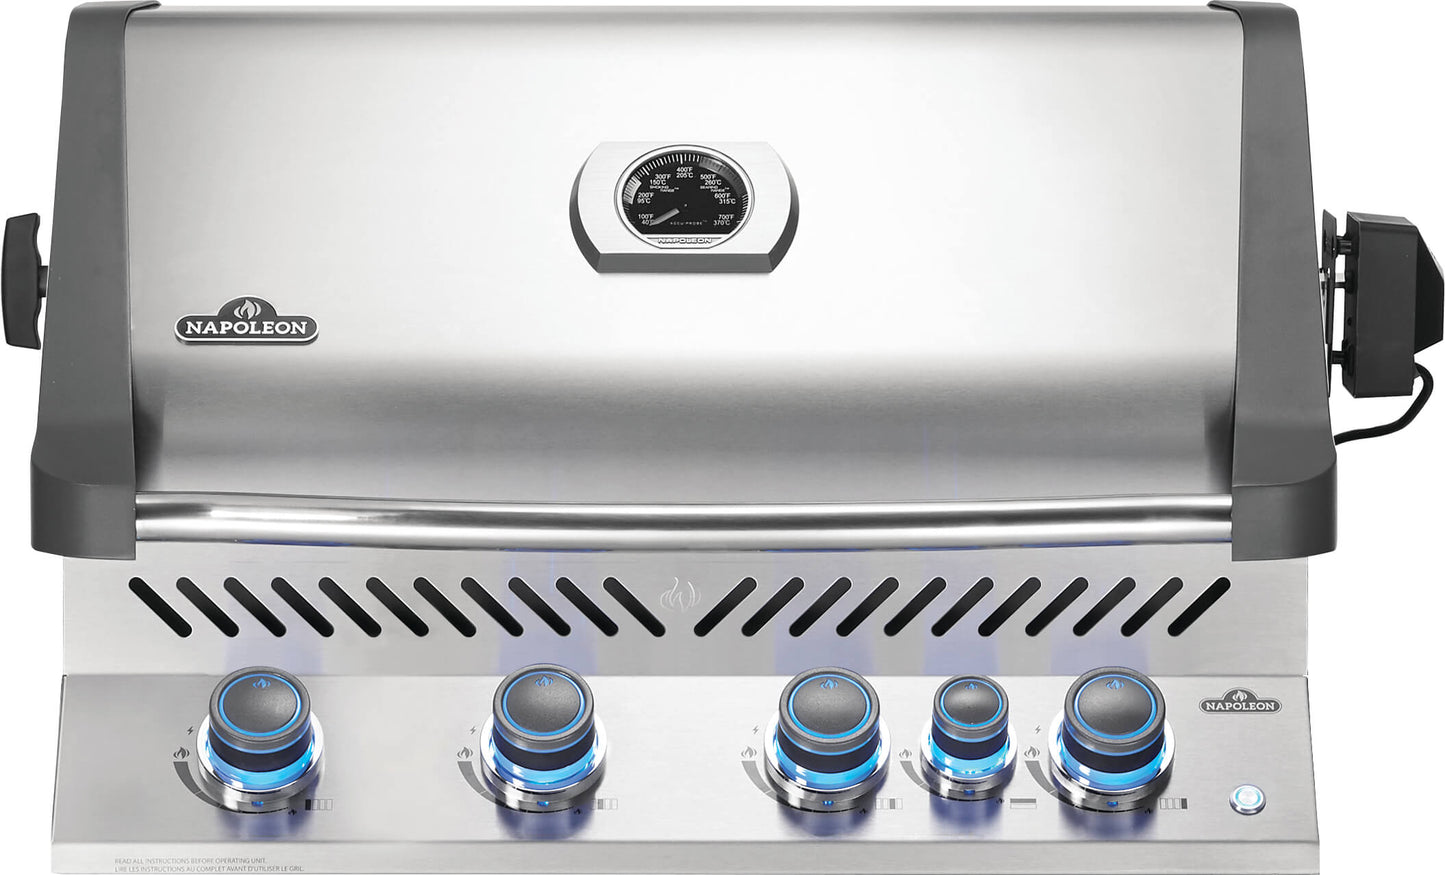 Built-in Prestige® 500 Grill Head with Infrared Rear Burner